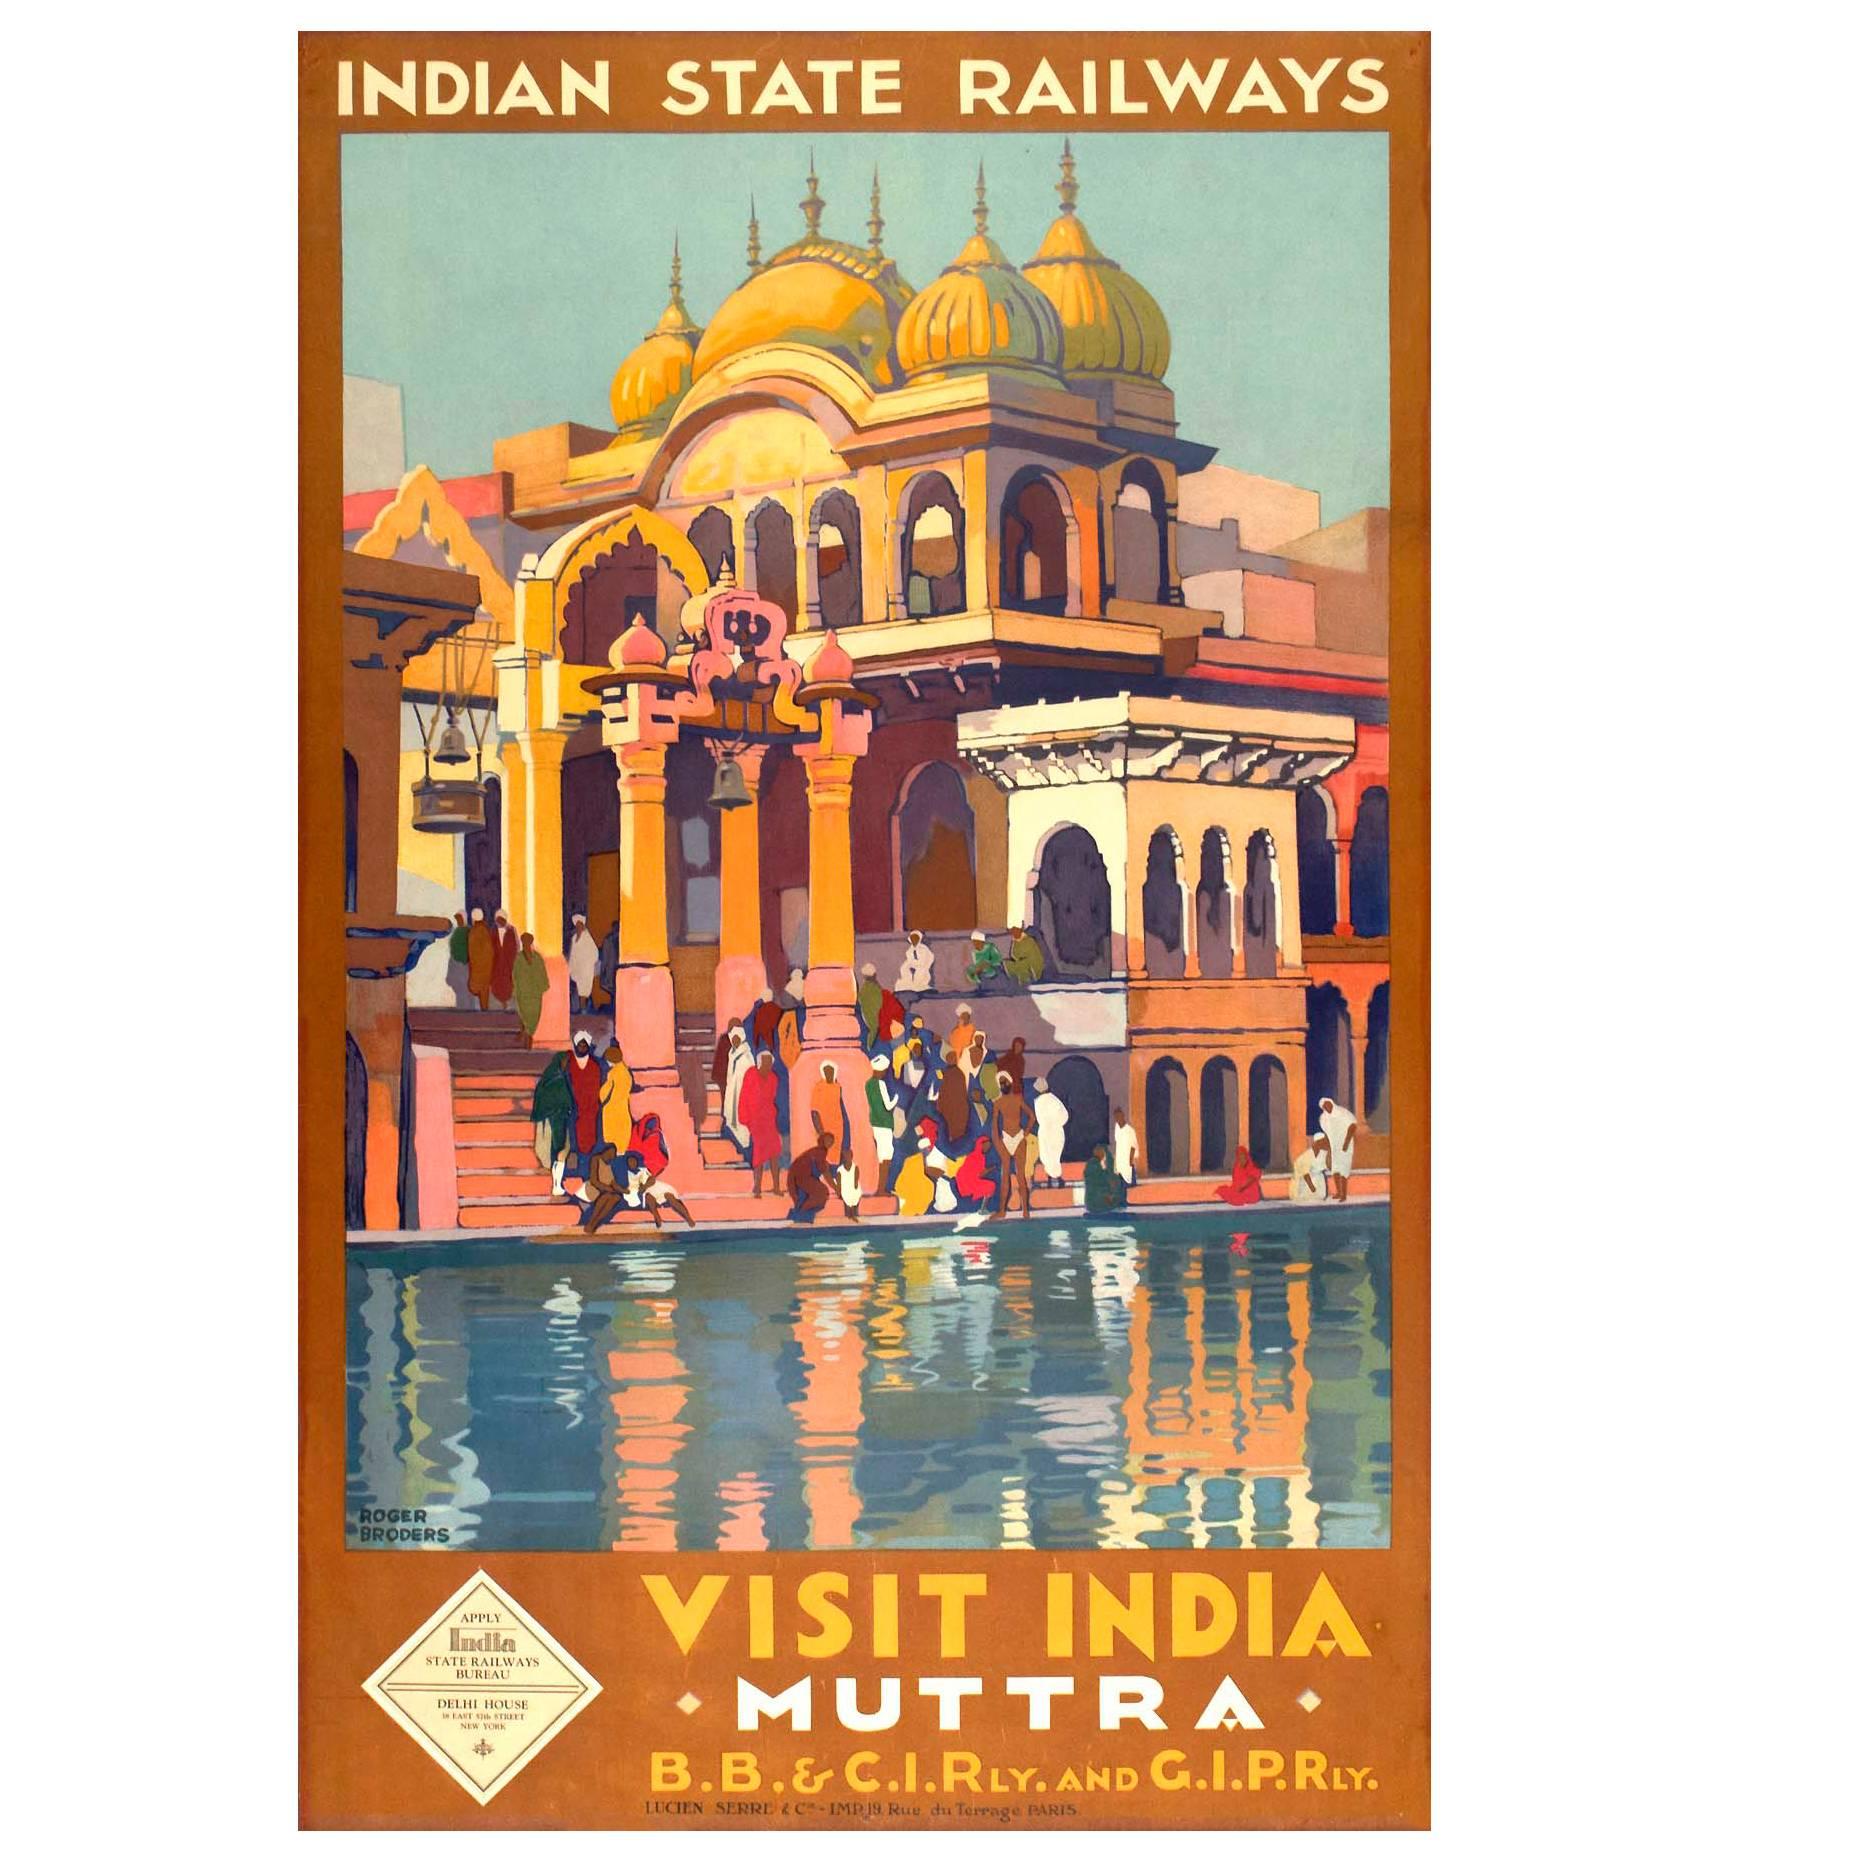 Original India Railways Travel Poster by Roger Broders